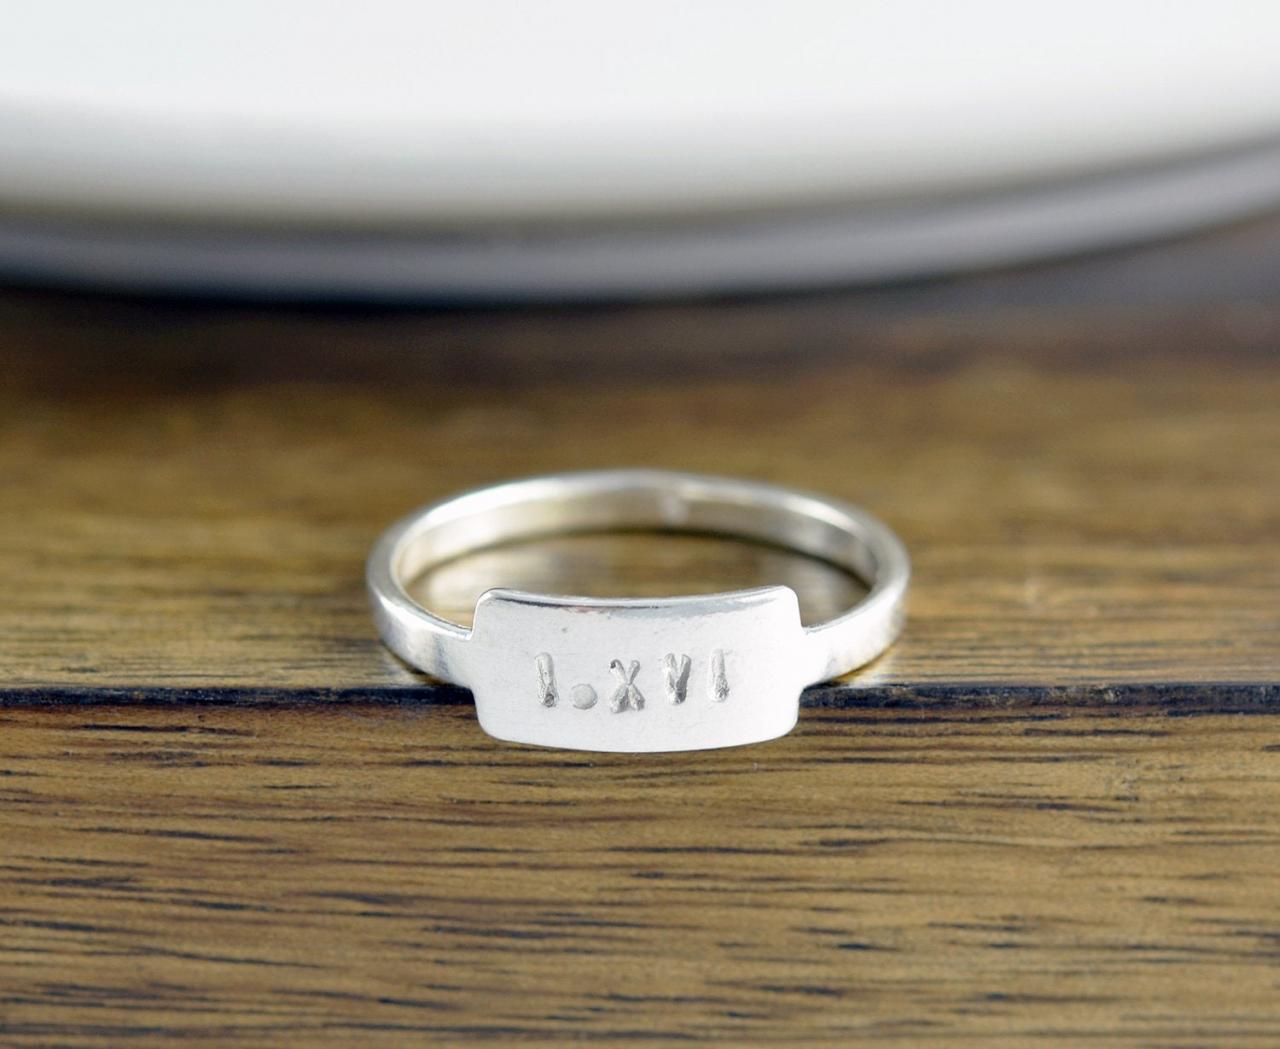 Name Ring, Sterling Silver Ring, Roman Numeral Ring, Personalized Ring, Hand Stamped Tab Ring, Silver Stacking Rings, Gift For Her